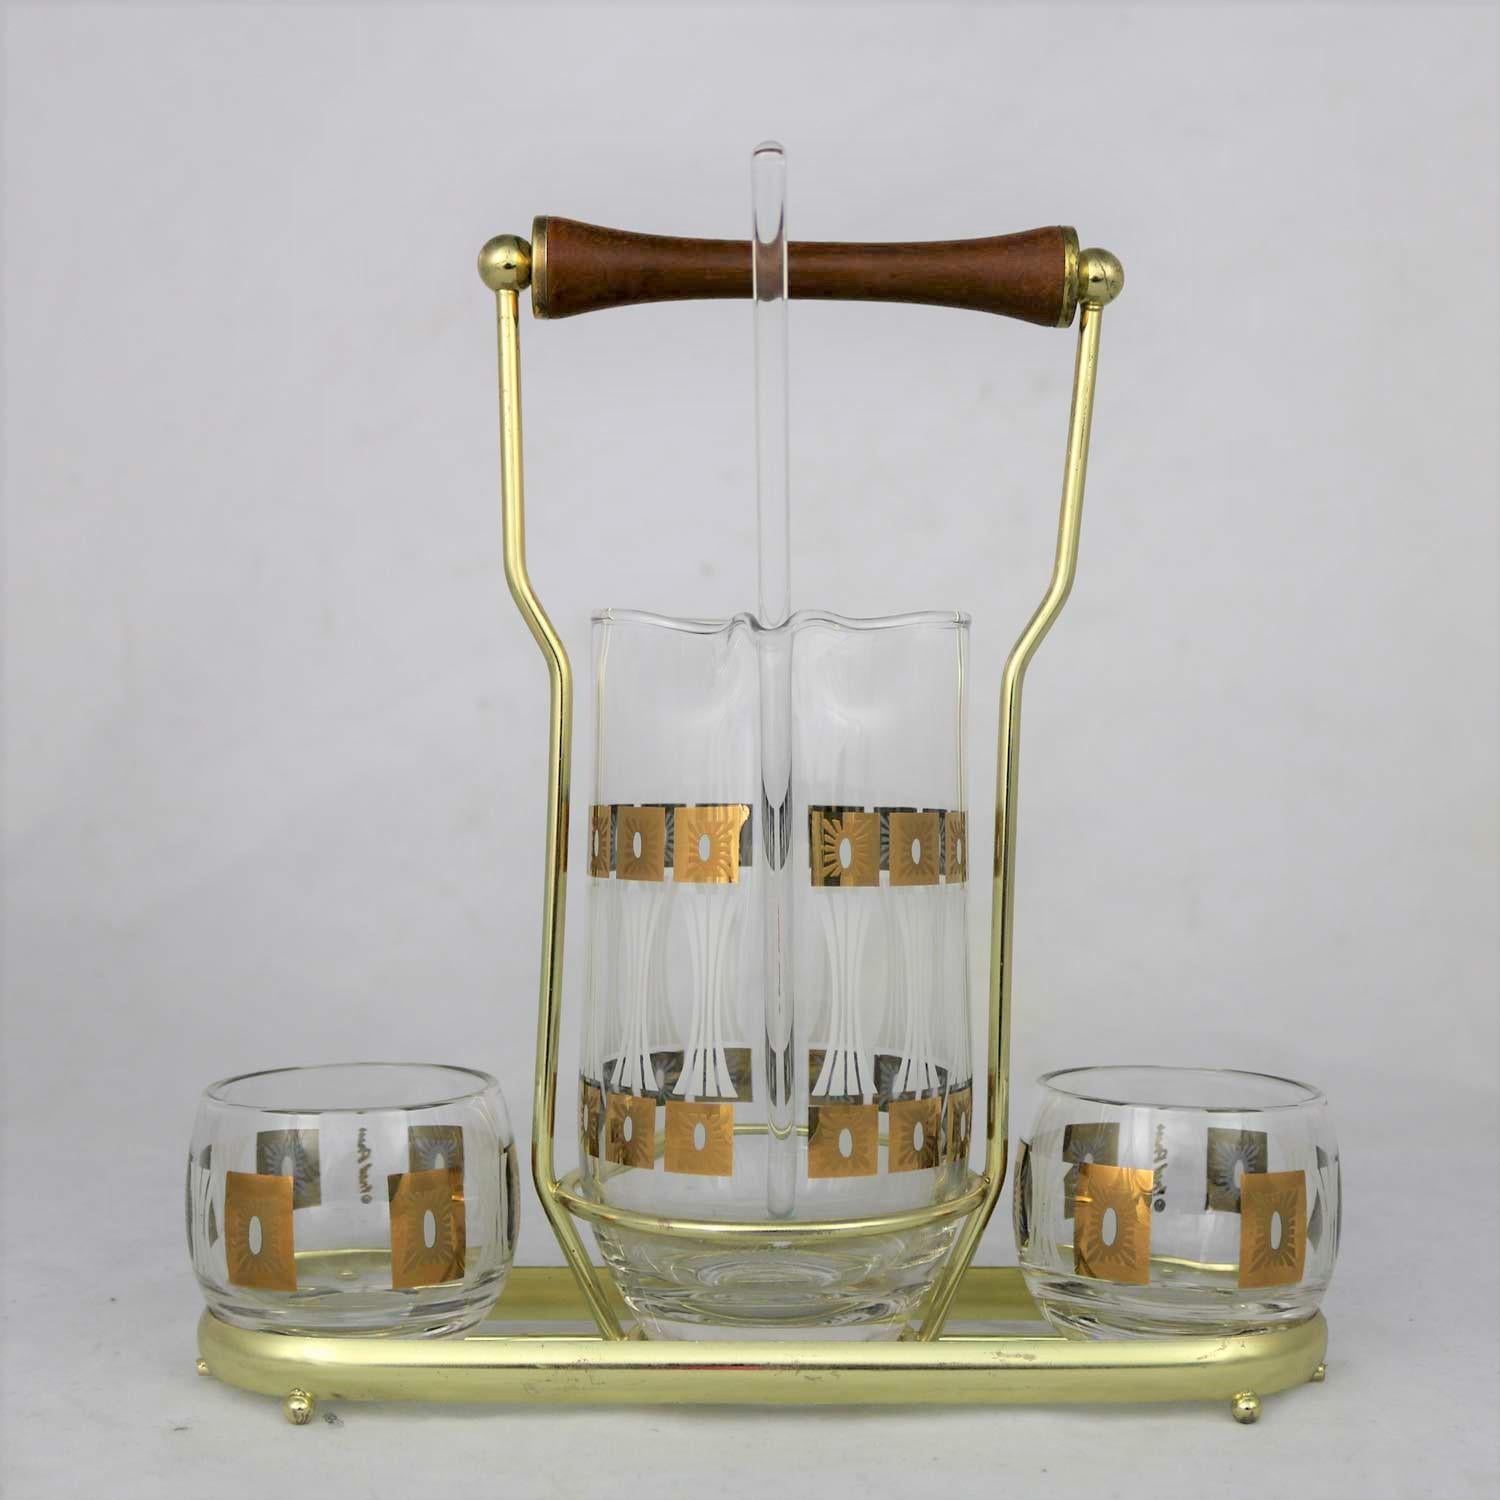 Handsome Mid-Century Modern cocktail caddy set by Fred Press in his sun block pattern. Comprised of a signed cocktail carafe with glass stirrer and two signed roly poly glasses in a brass plated carrier. They are all in fabulous vintage condition